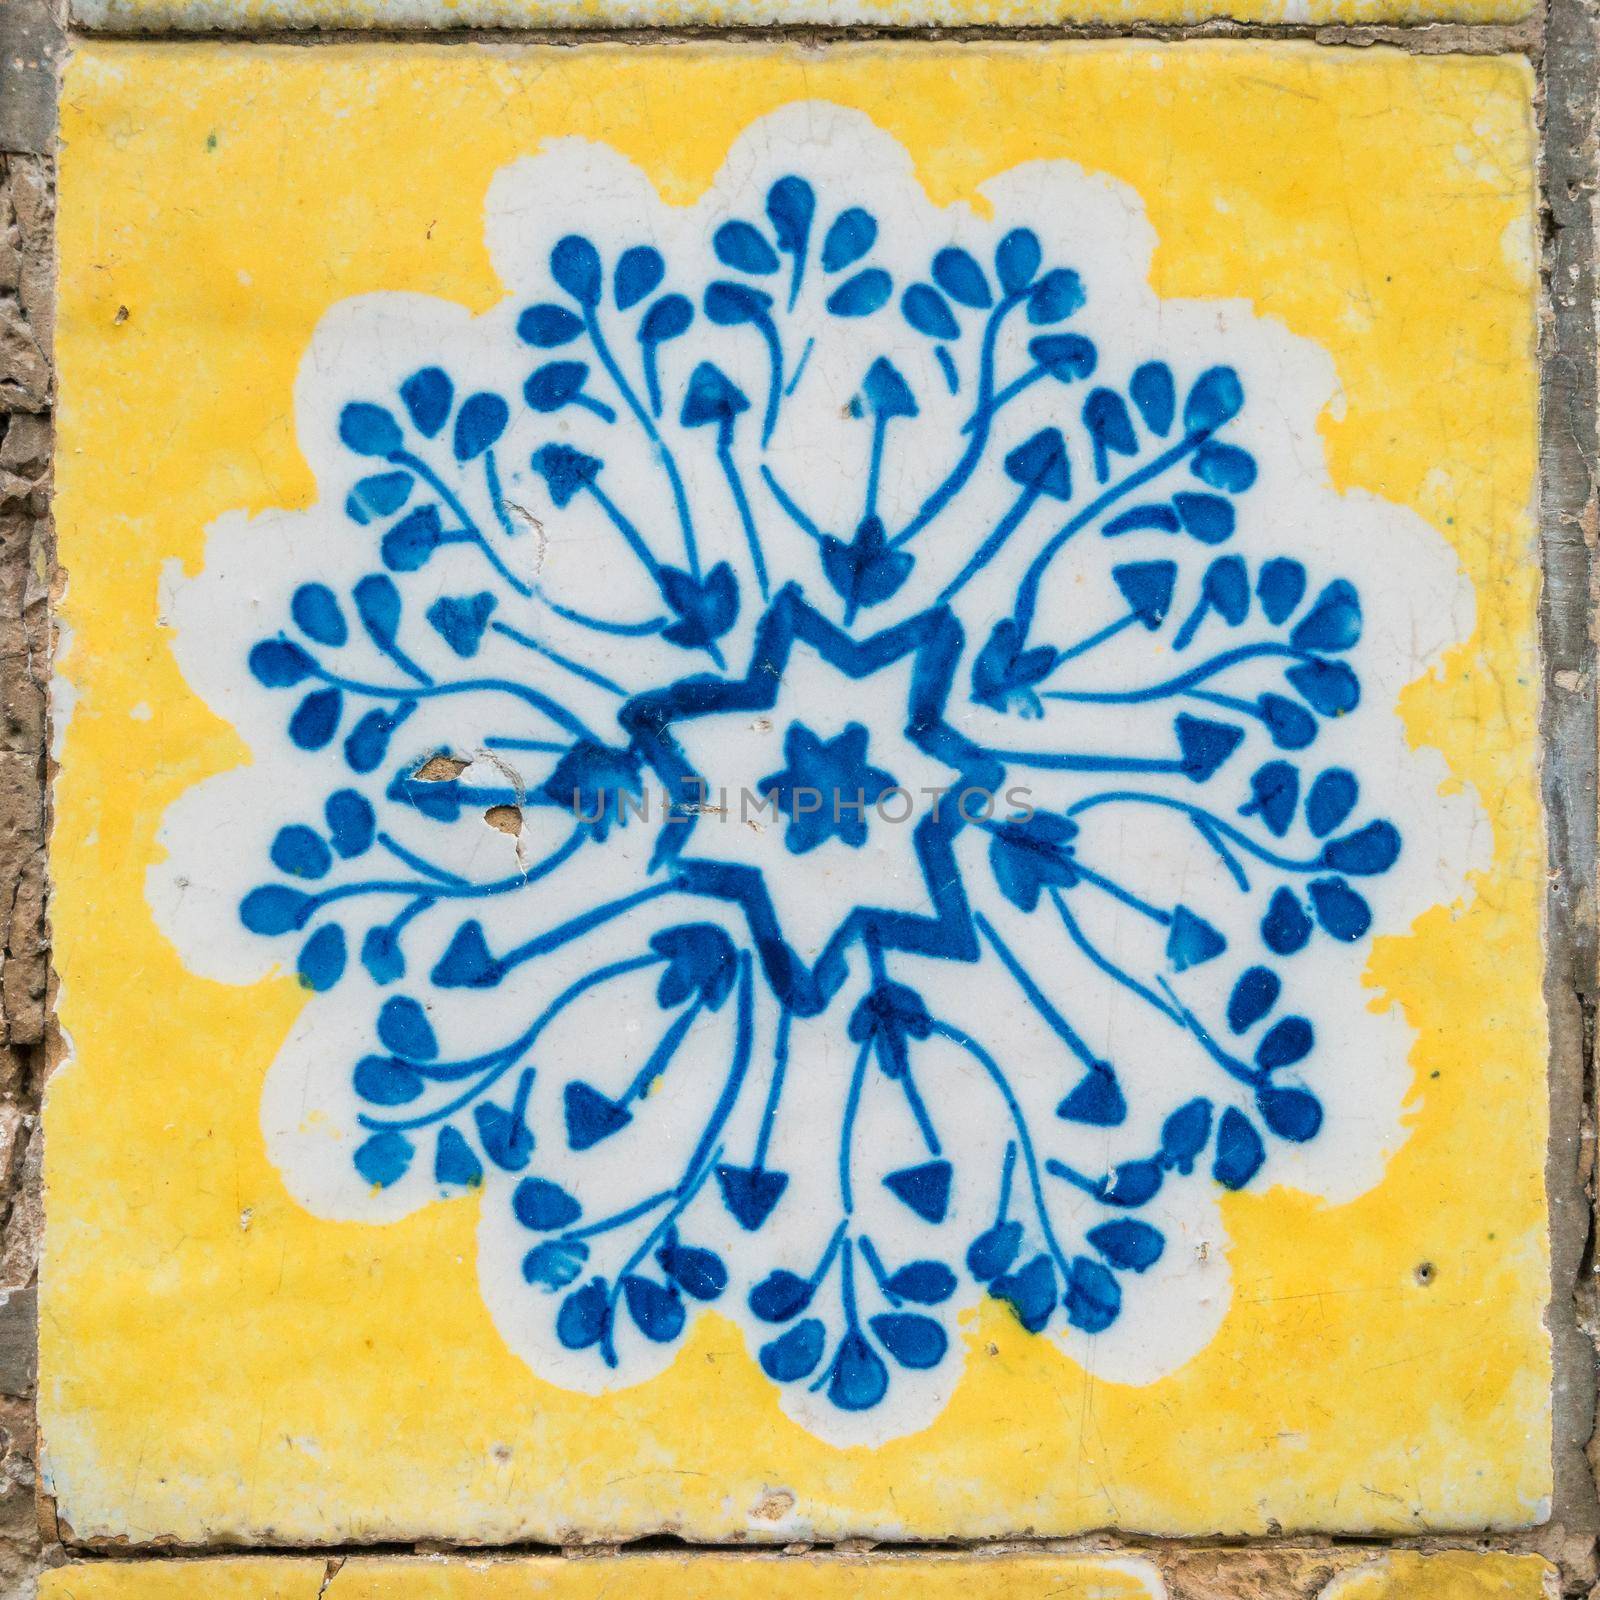 Old typical portuguese tiles called azulejos taken from the external walls of an old house in Lisbon